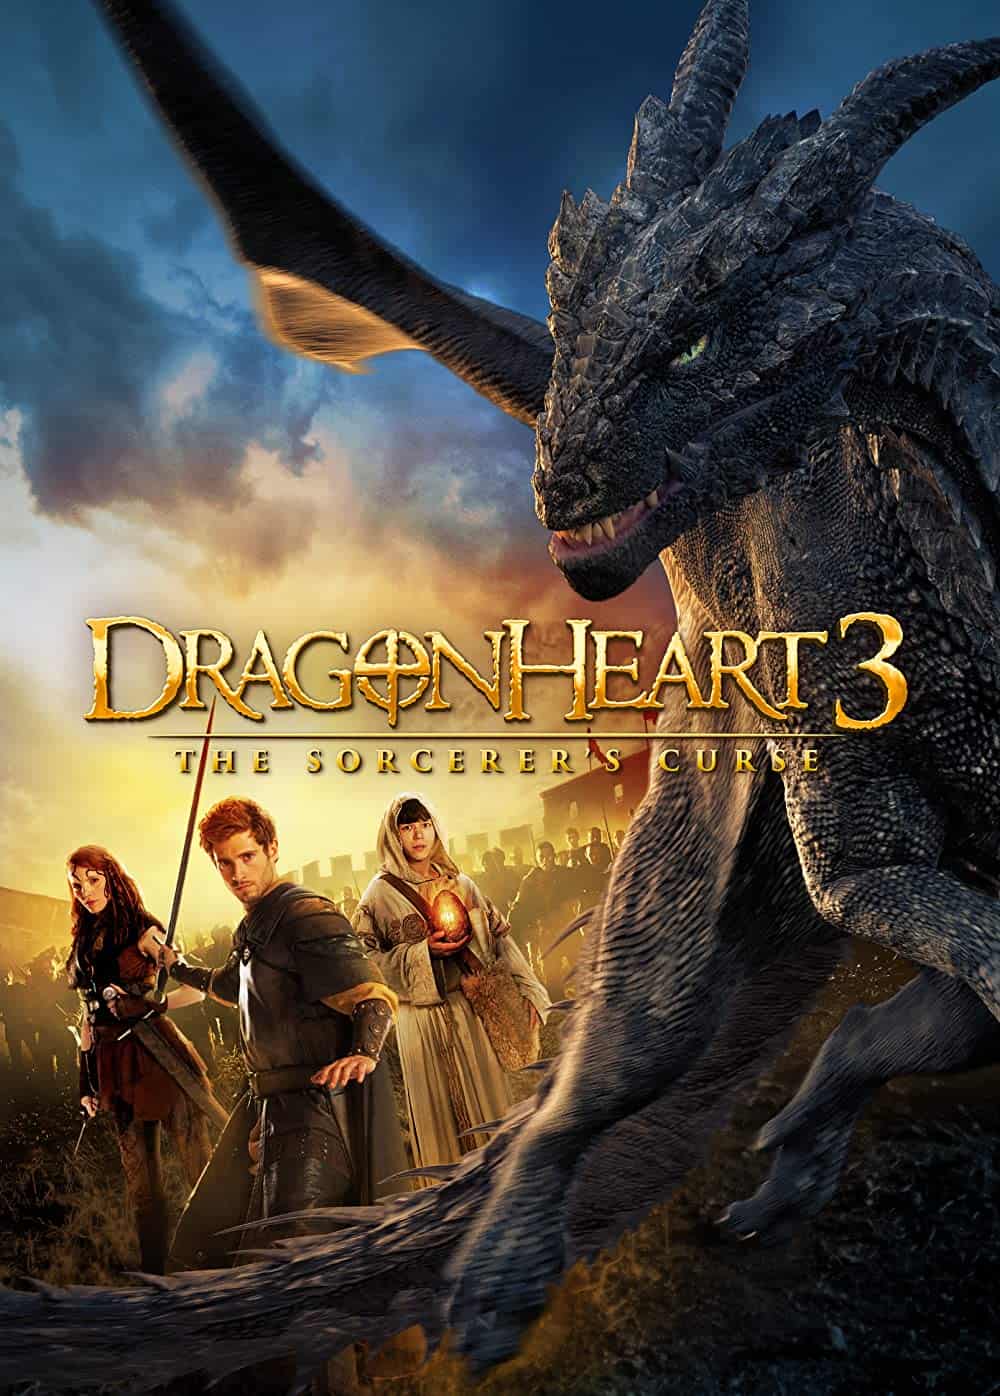 new movie like Lord of The Rings Dragonheart 3 The Sorcerer's Curse (2015)